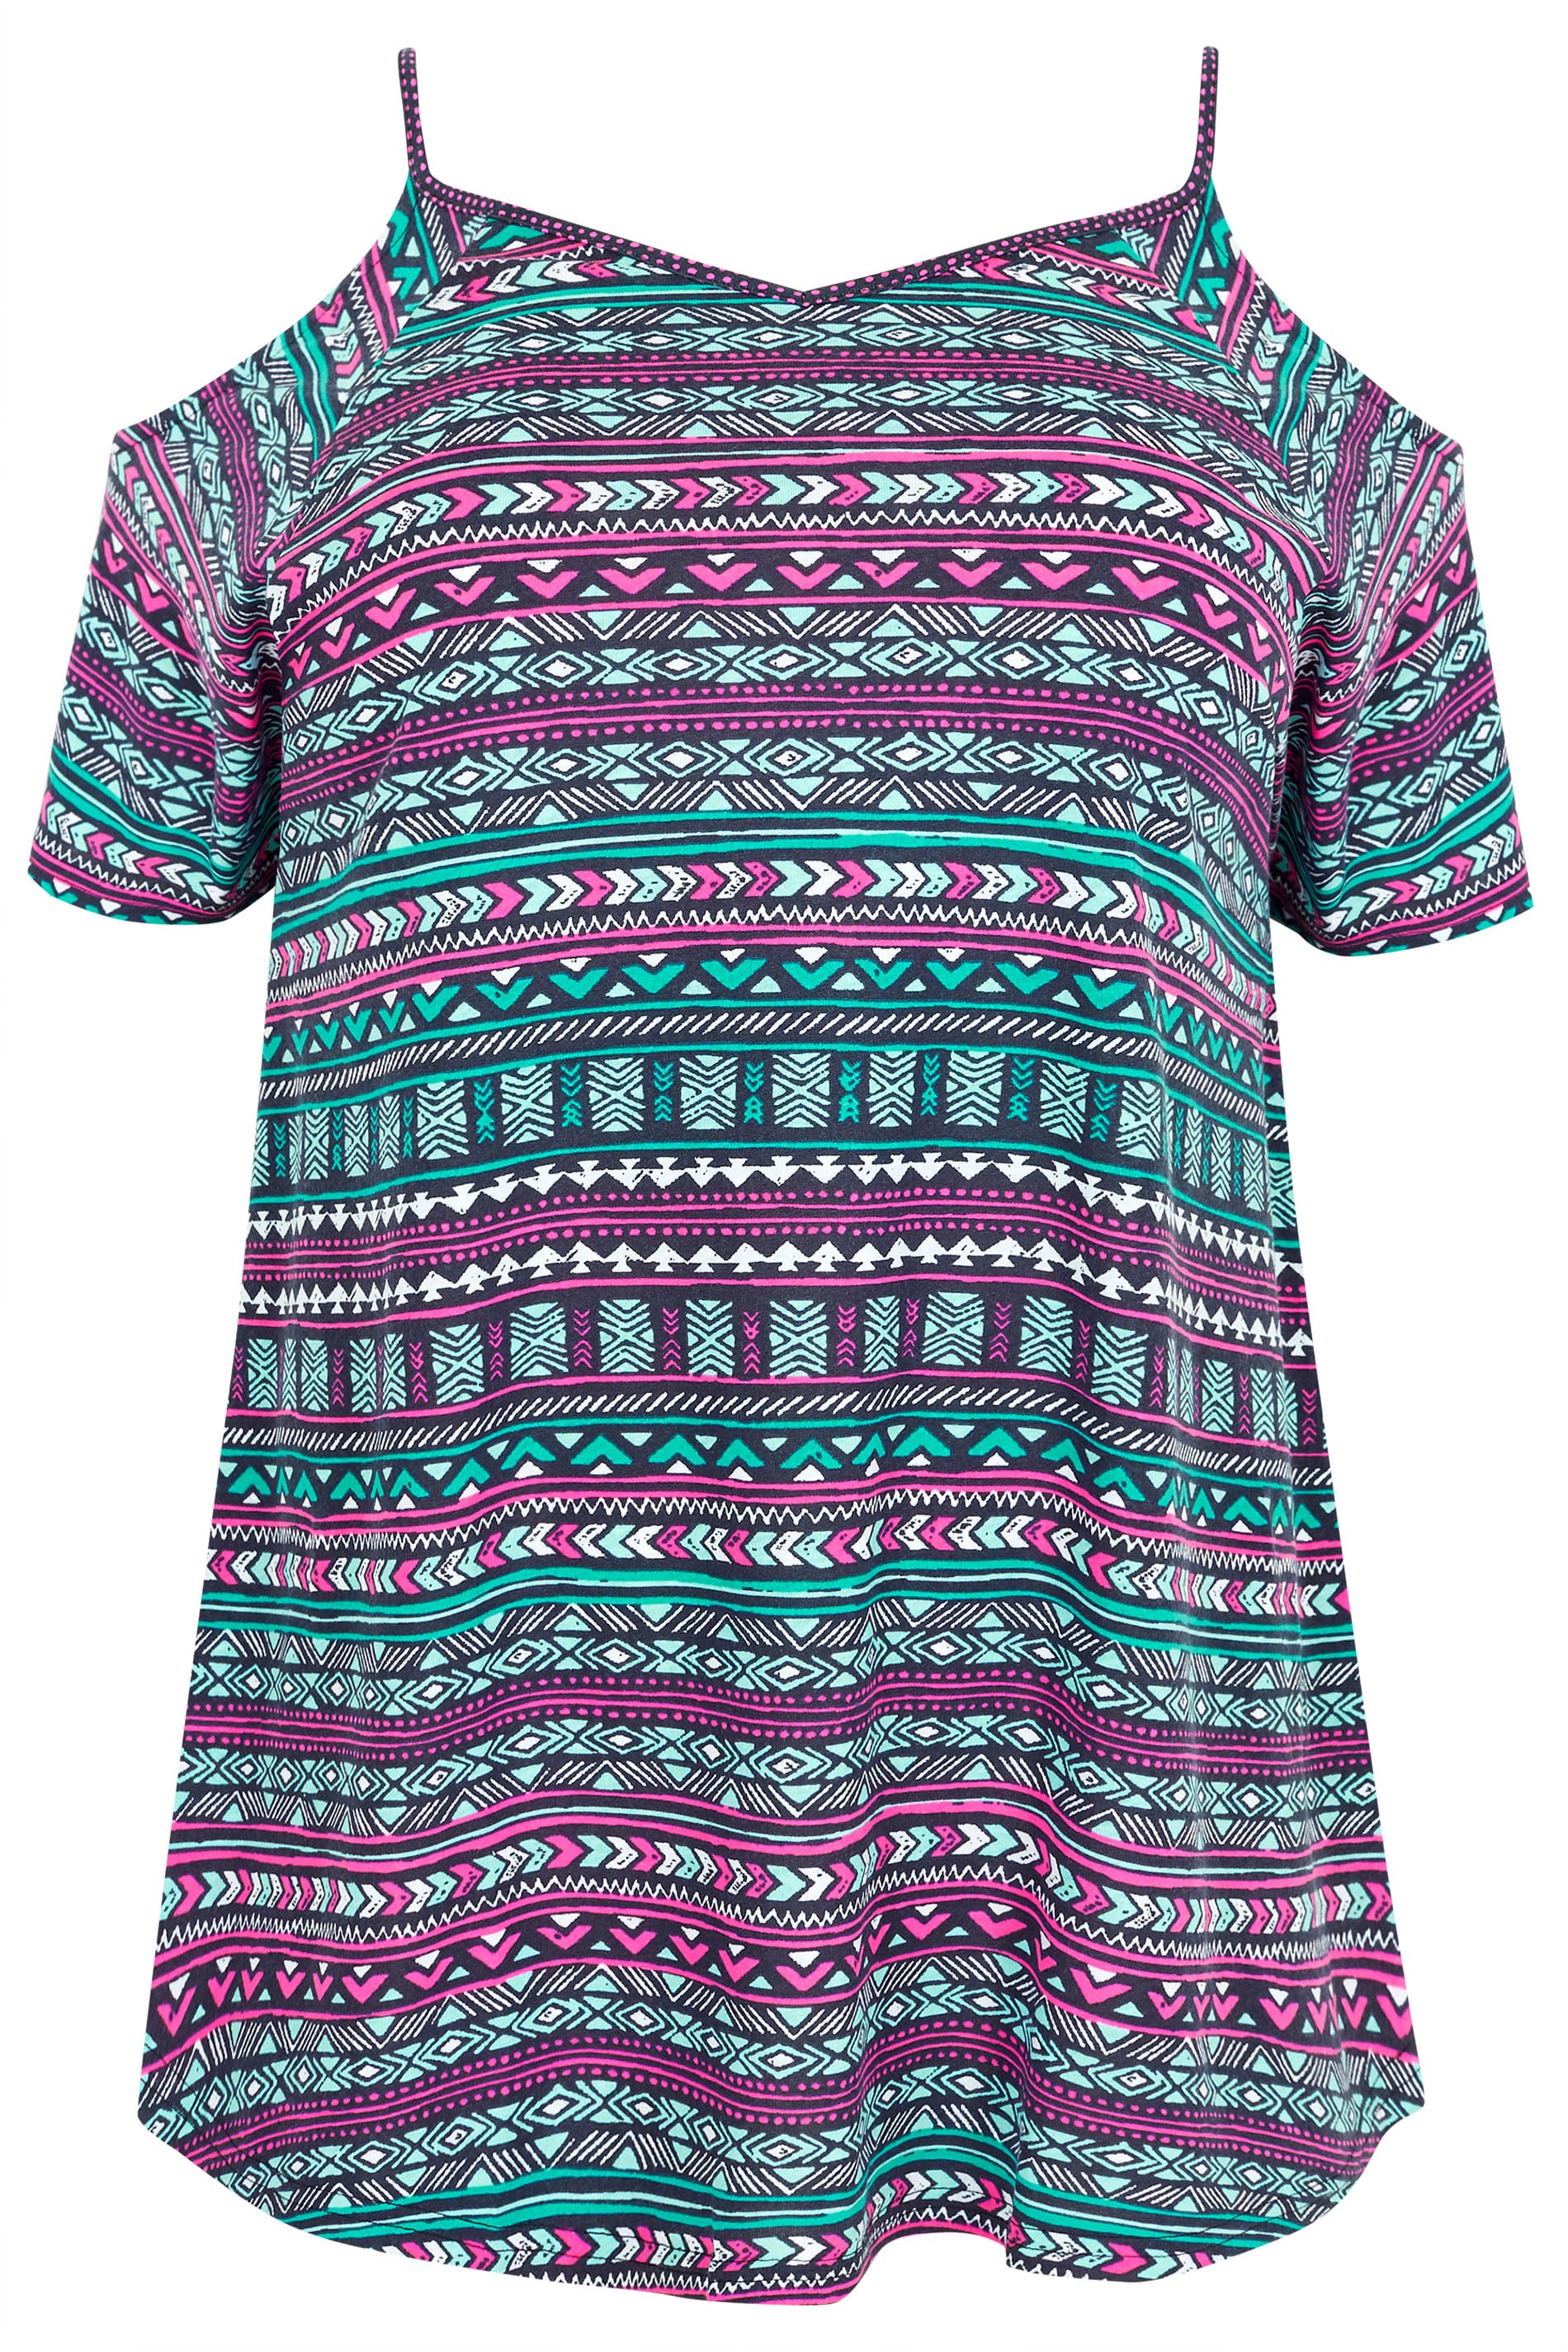 Pink Aztec Cold Shoulder Top Plus Sizes 16 To 36 Yours